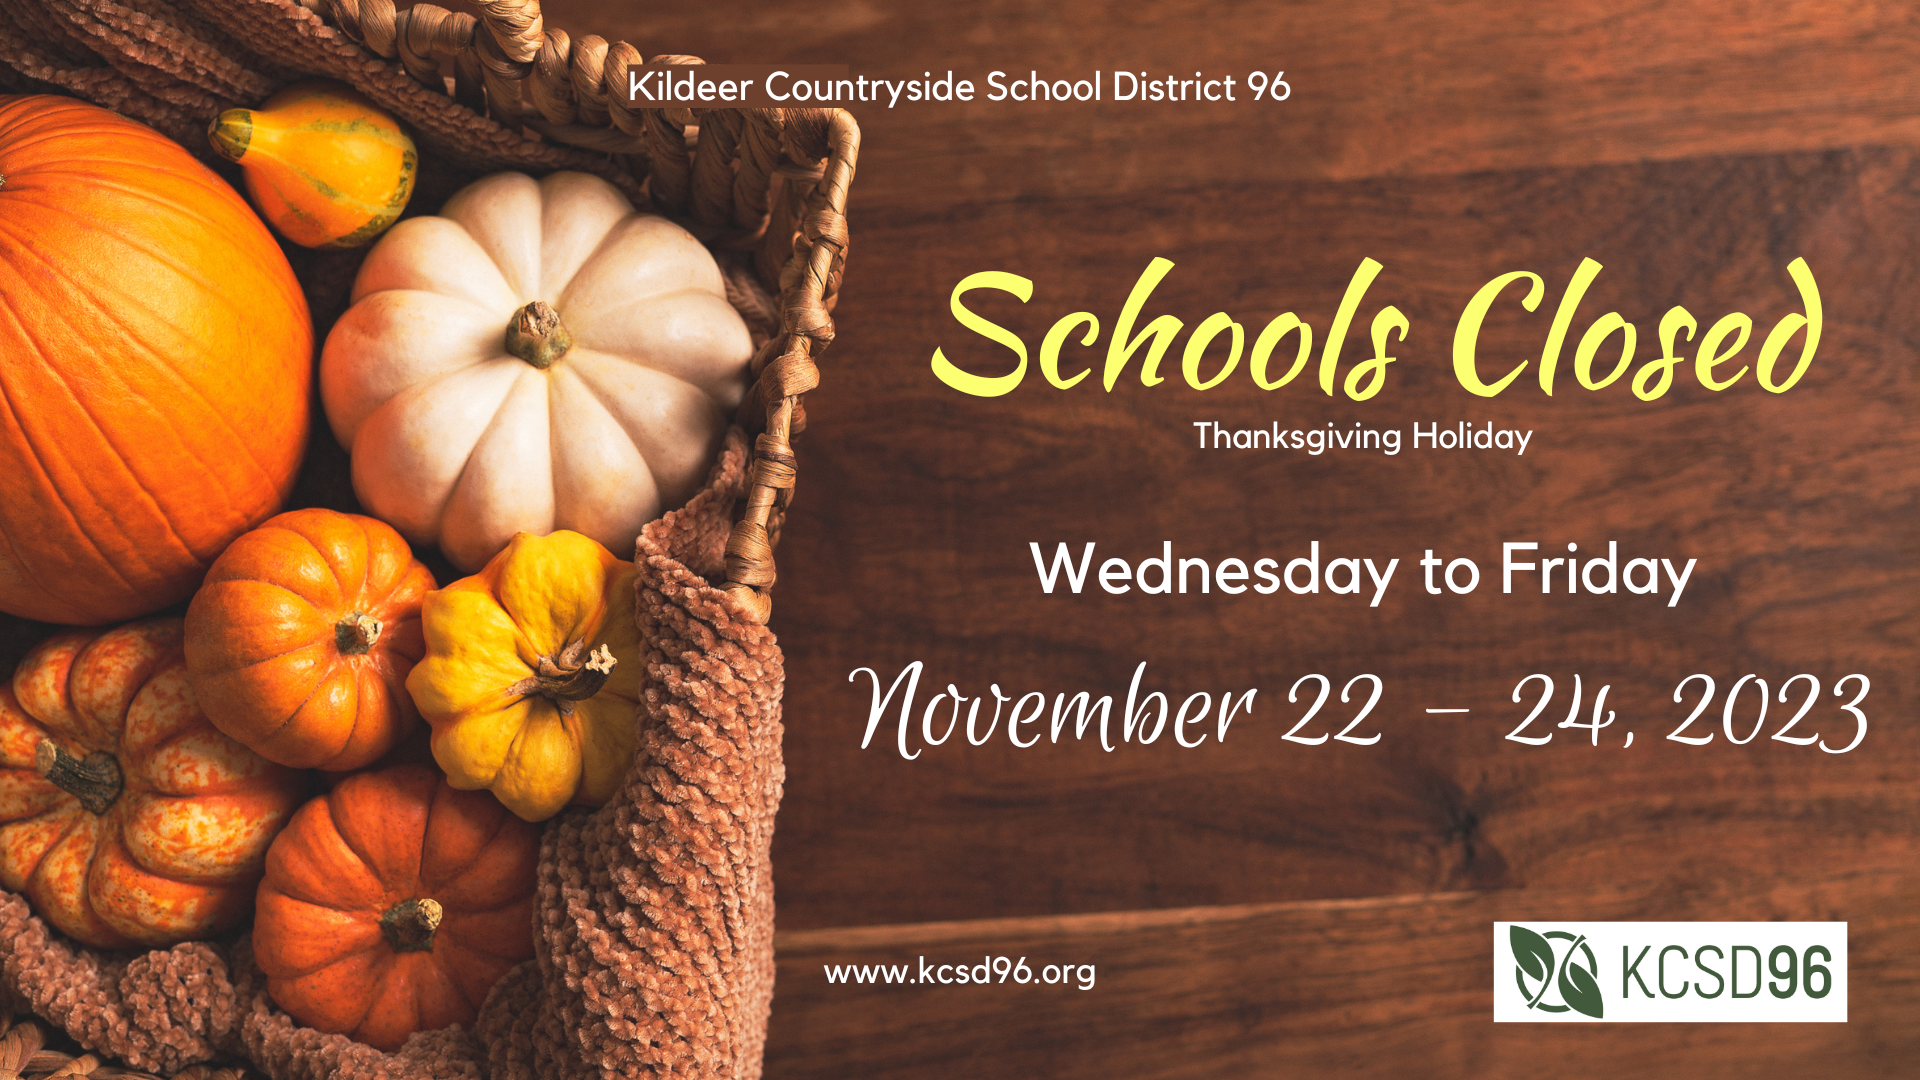 District 96 Schools Closed November 22 to 24, 2023